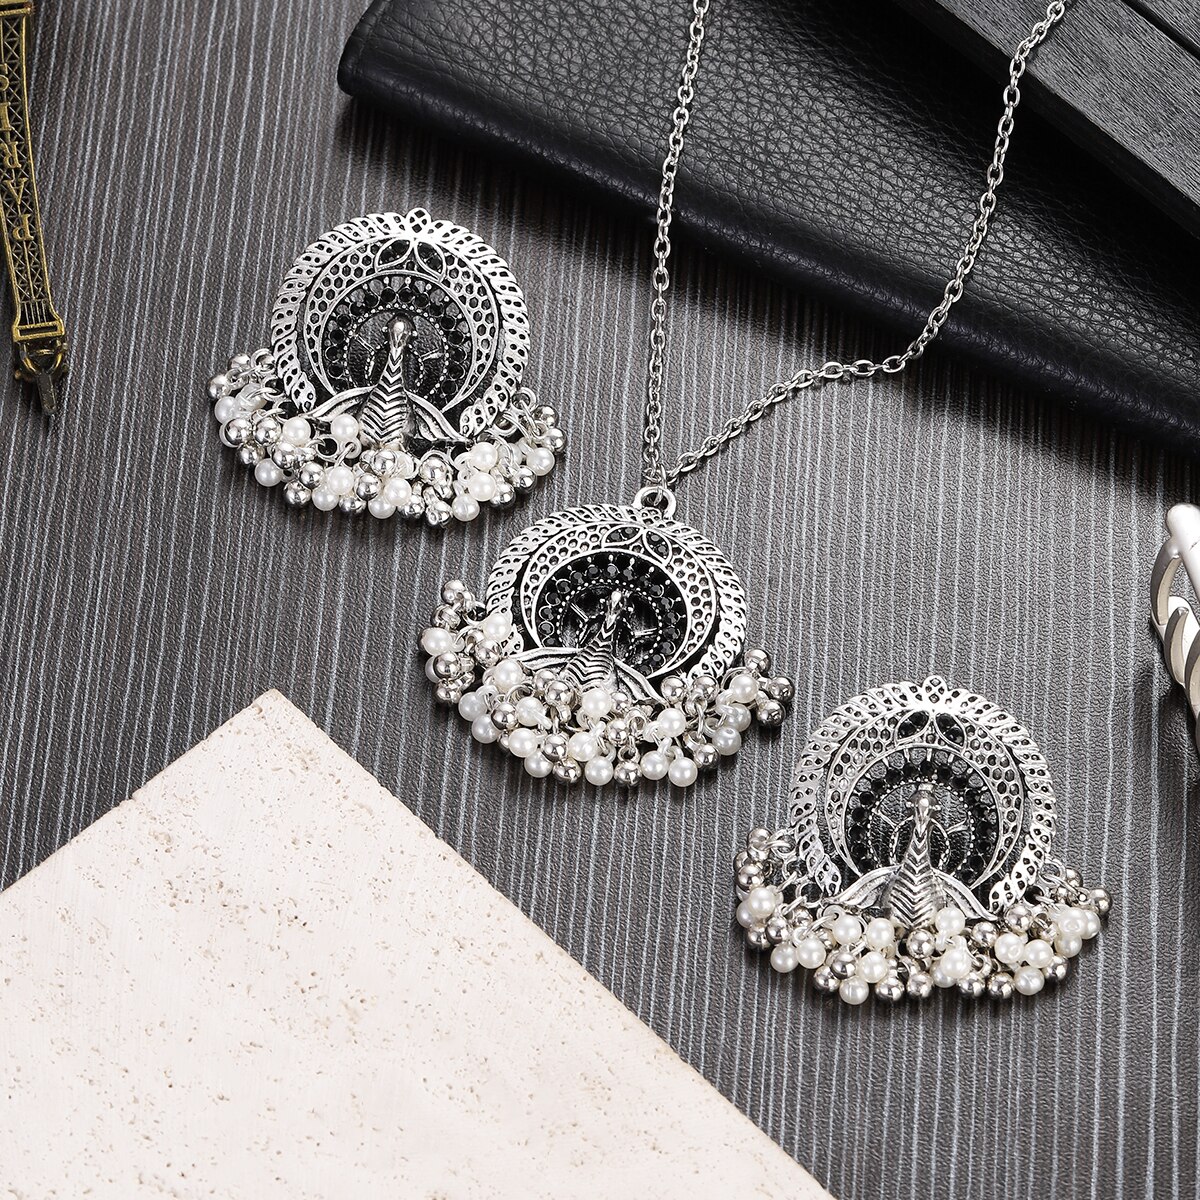 Vintage-Silver-Color-Jewelry-Sets-for-Women-Accessories-Ethnic-Geometric-Peacock-Crystal-Pendant-Nec-1005004941302824-4